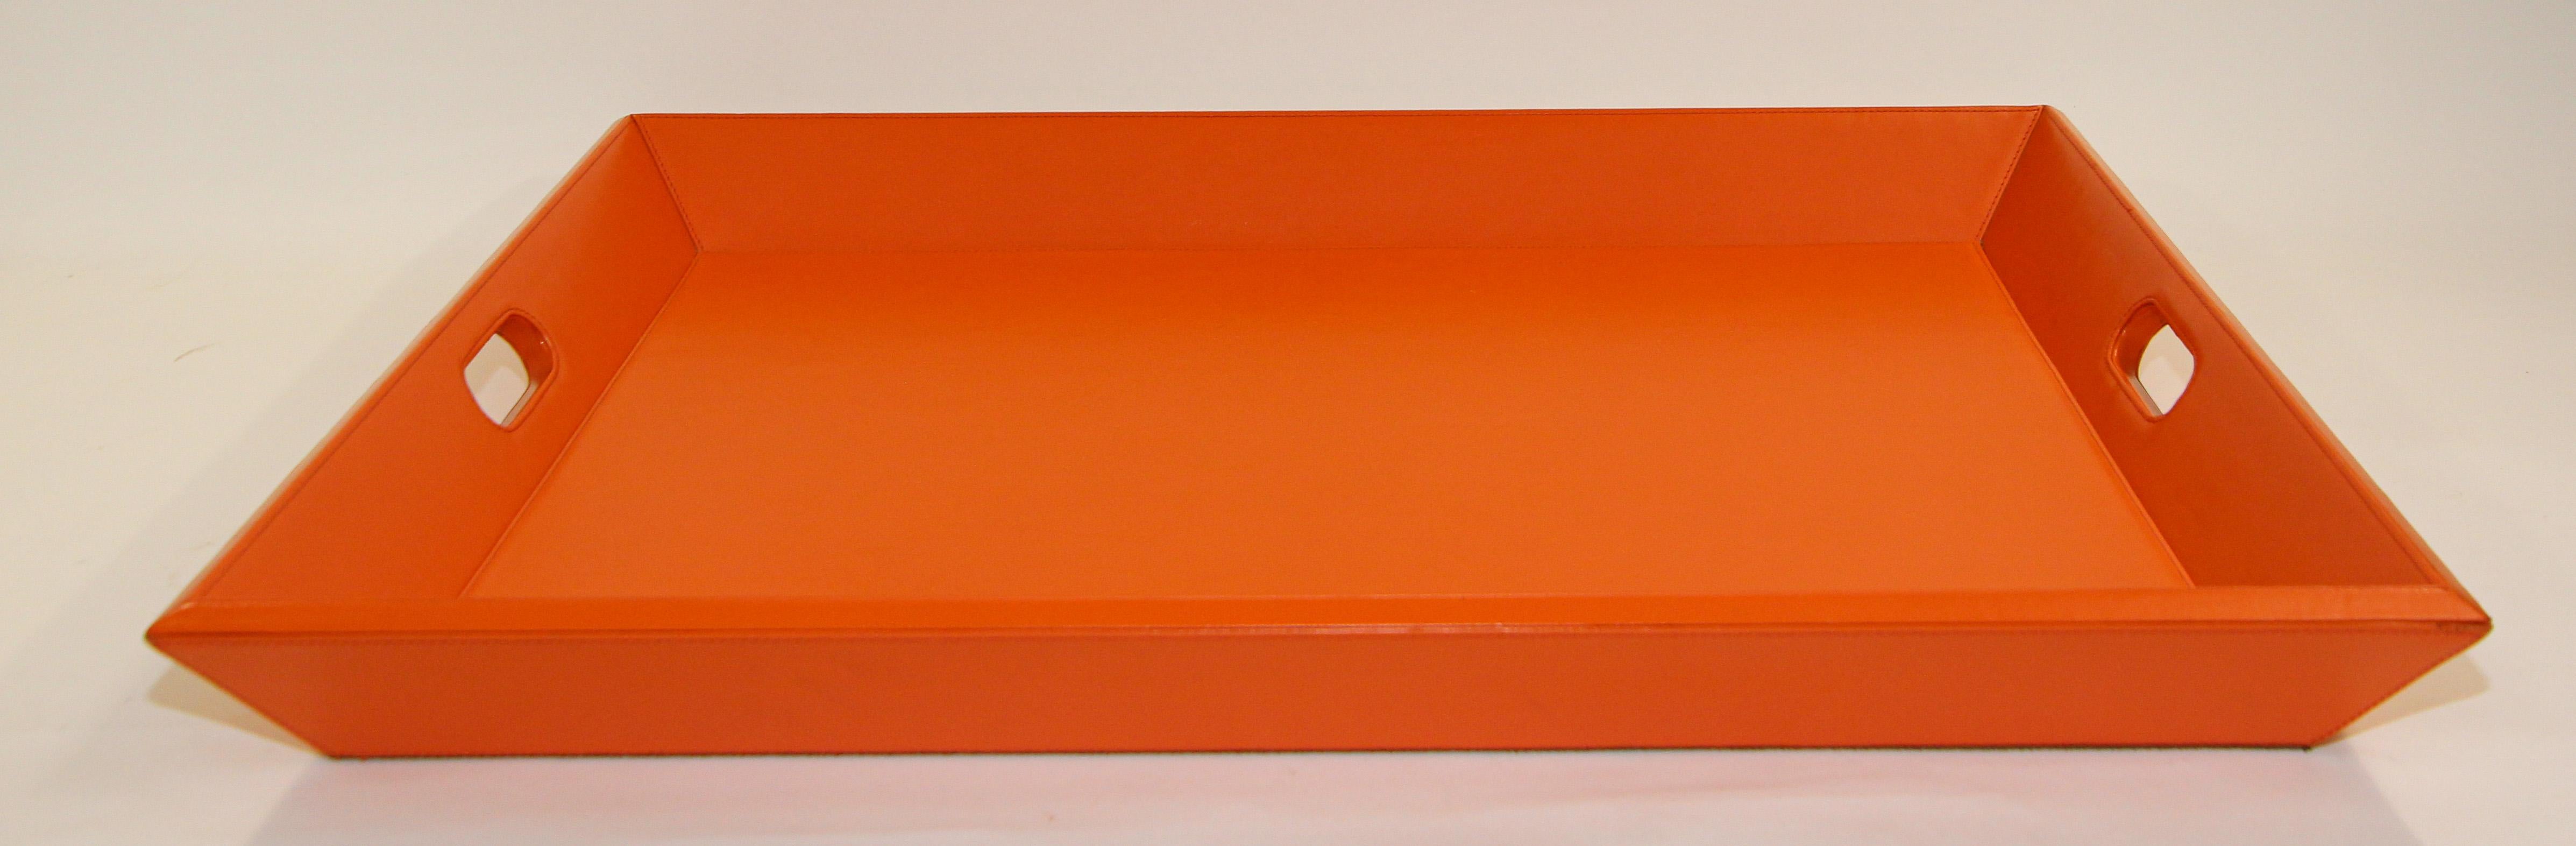 American Large Vintage Orange Tray with Handles by Williams Sonoma Home